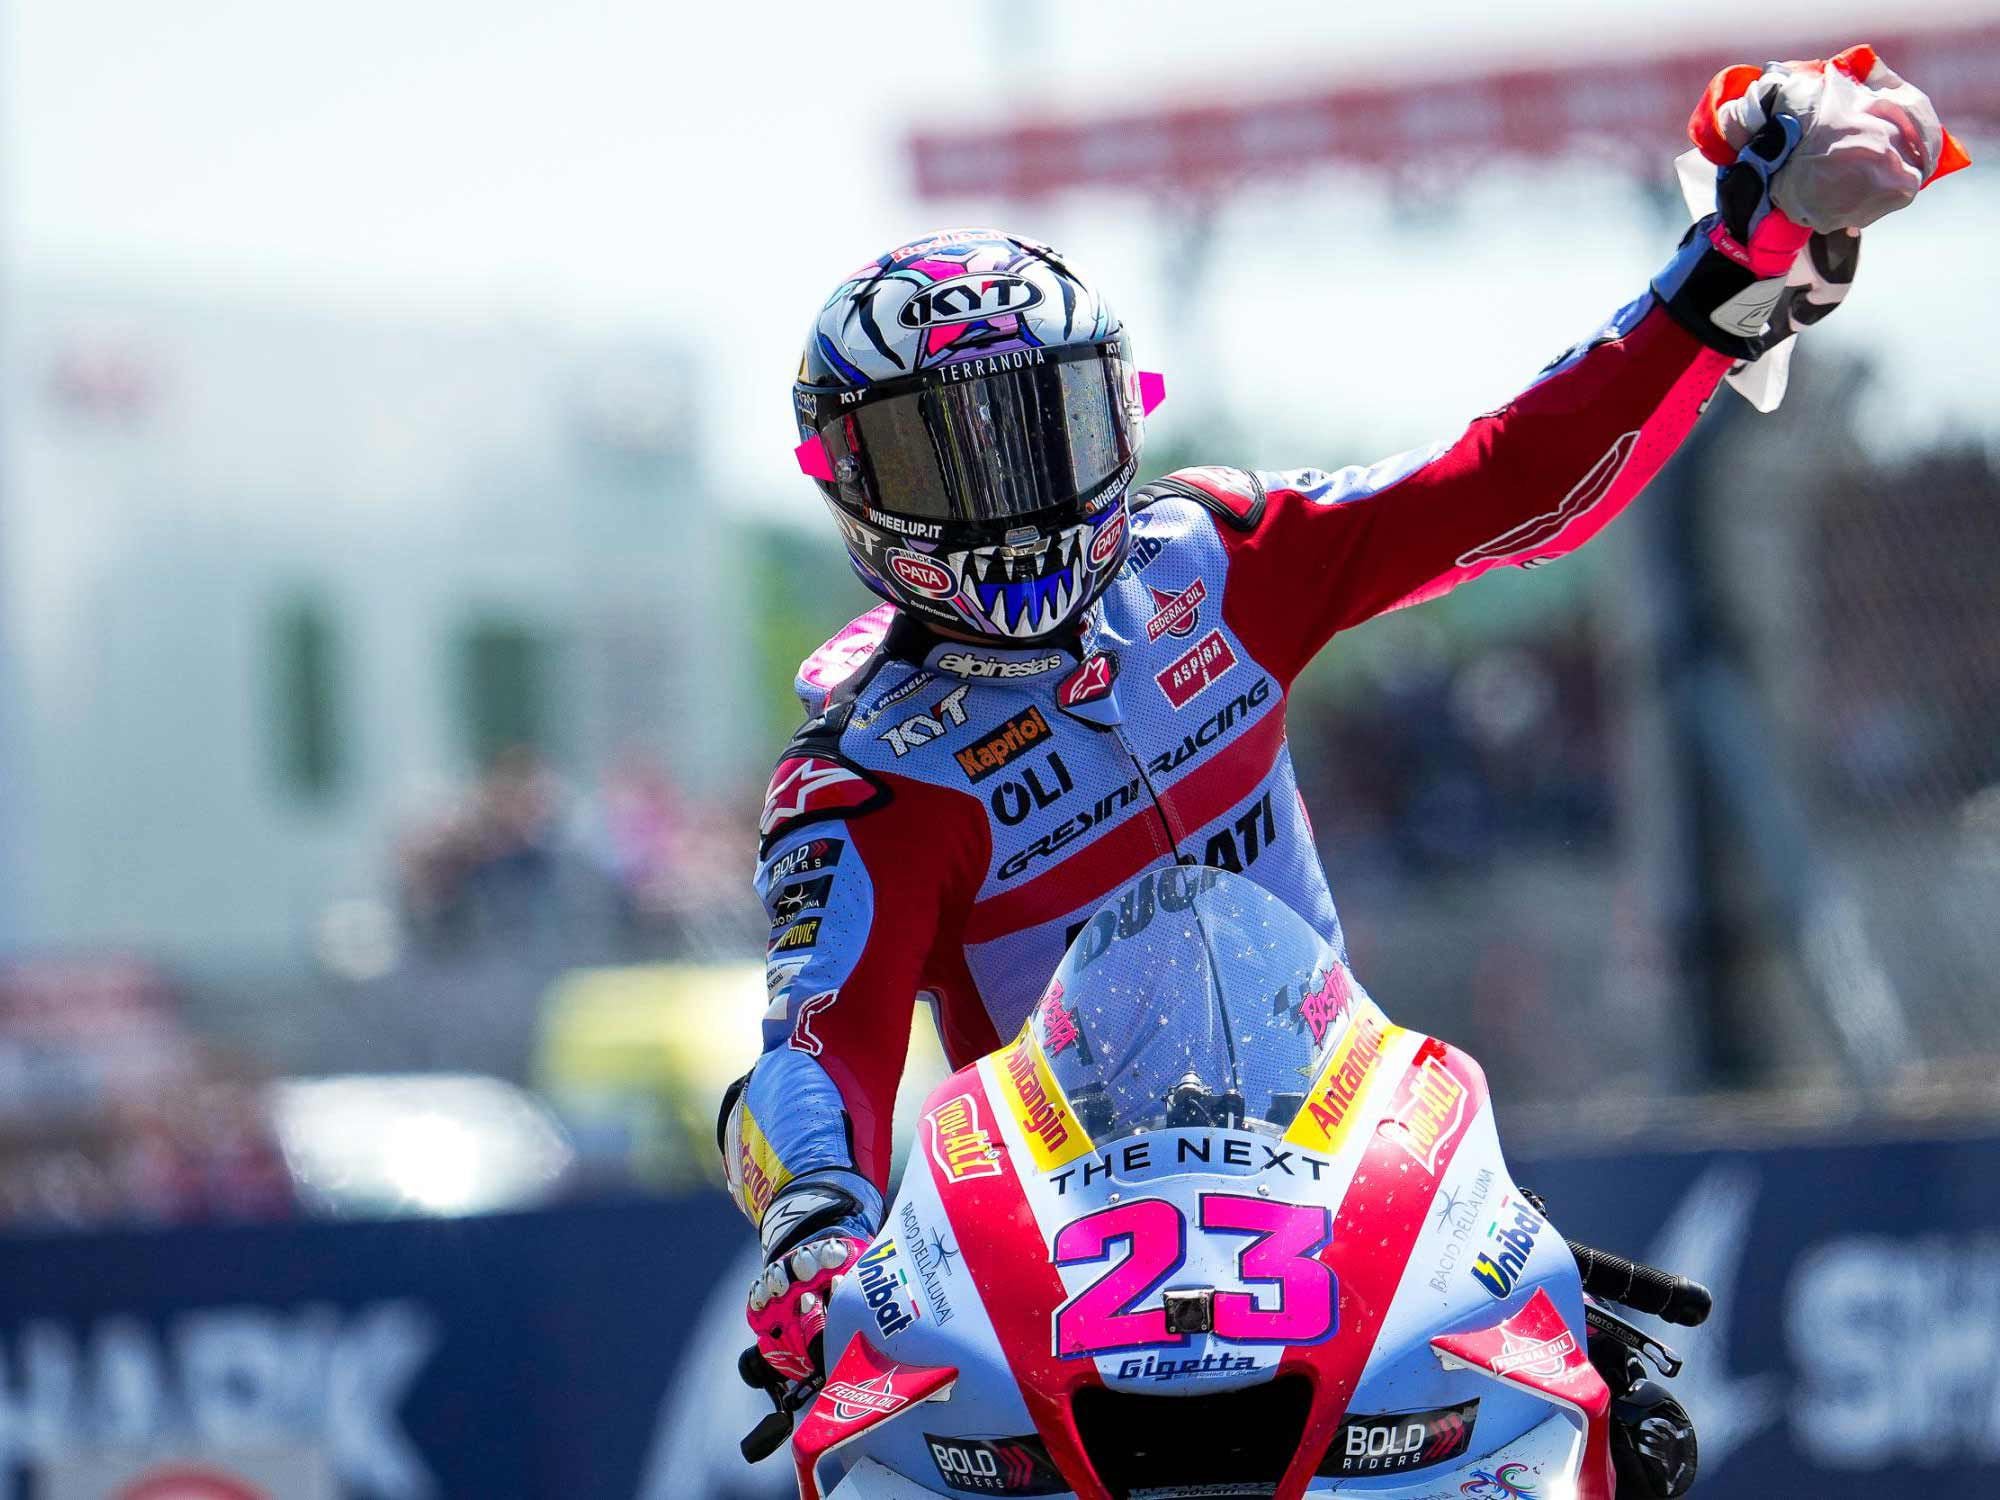 Ducati’s Enea Bastianini played the long game at Le Mans, and it paid off with his third victory of the season. He has closed to just eight points behind the series leader, Fabio Quartararo.